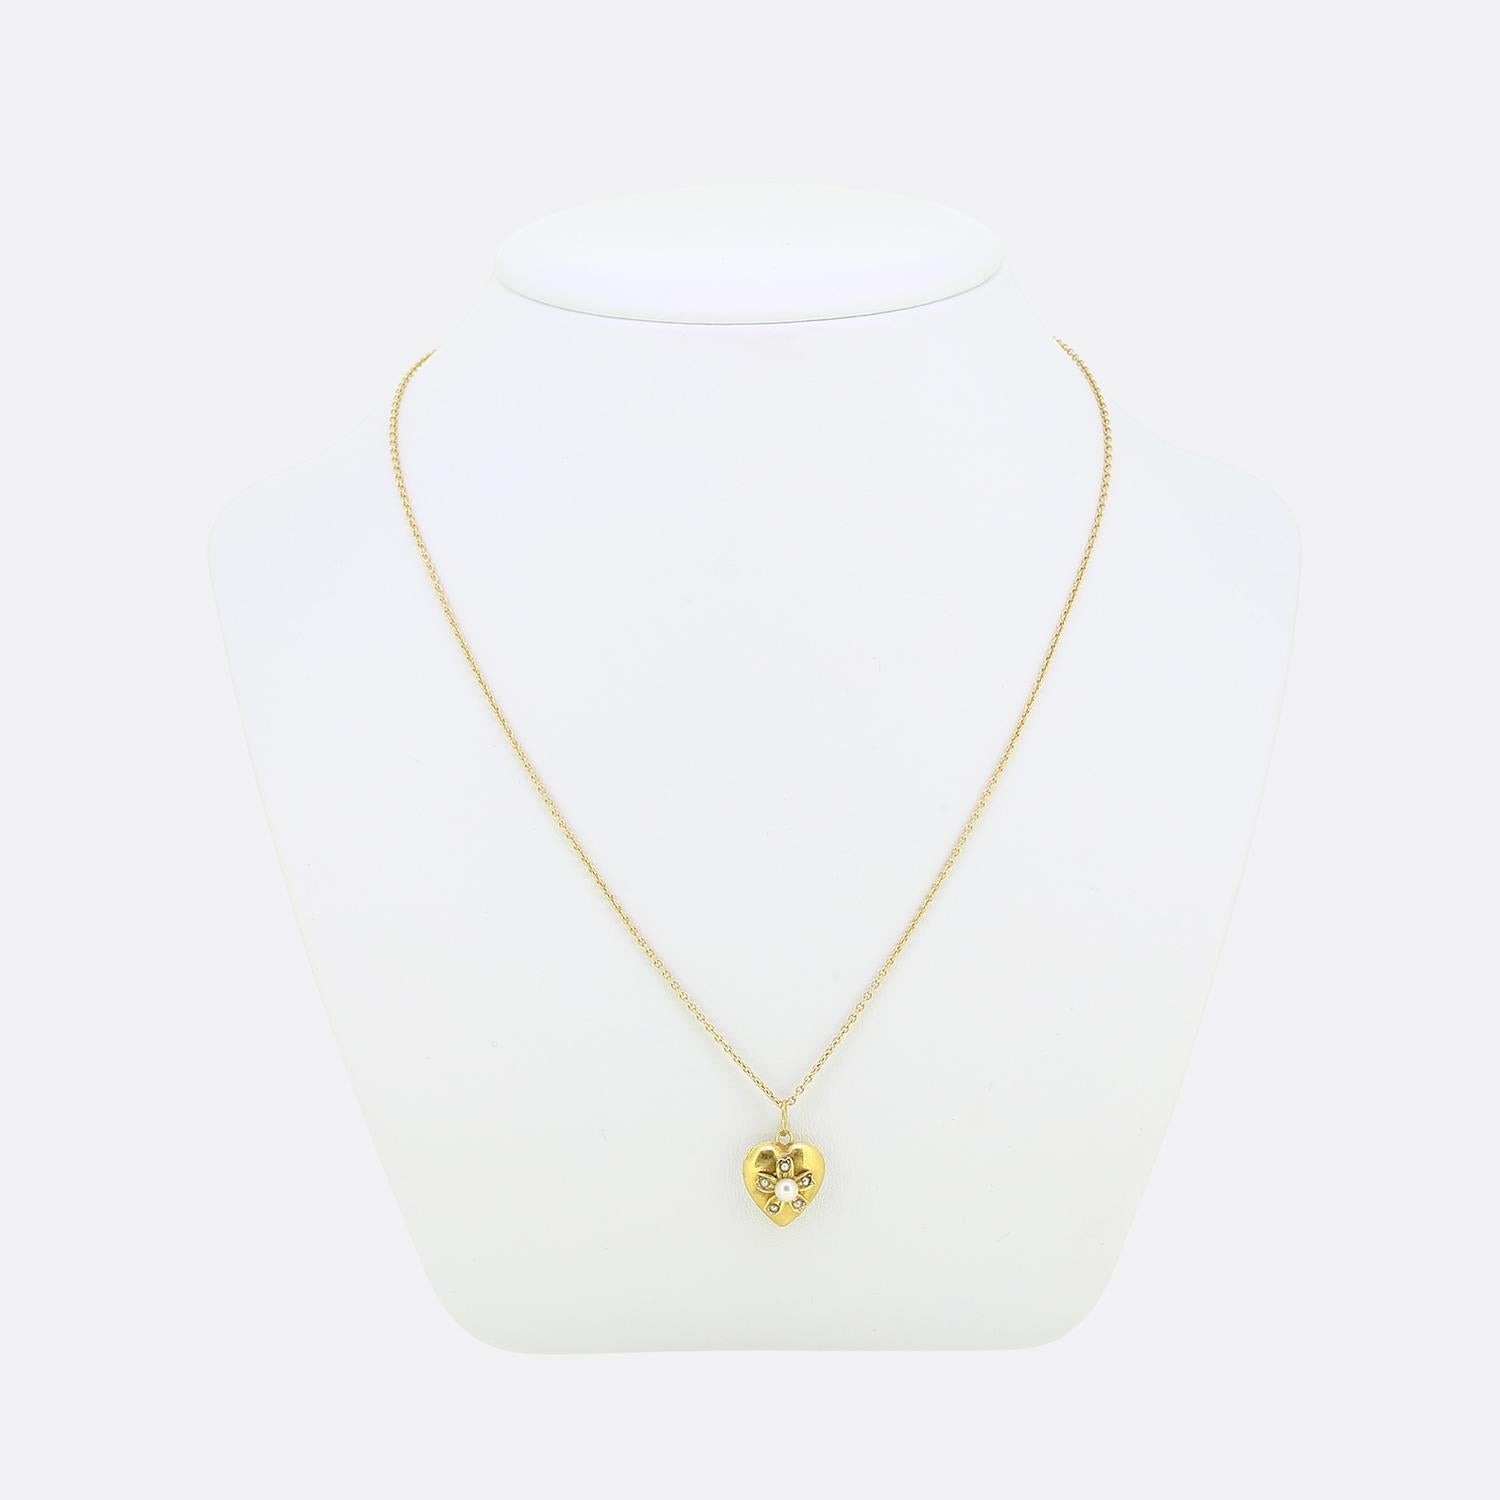 Here we have a wonderful pearl set pendant necklace. This antique pendant has been crafted from 18ct yellow gold into the the shape of a little love heart and expertly set with a single round shaped natural pearl at the centre. This focal stone is